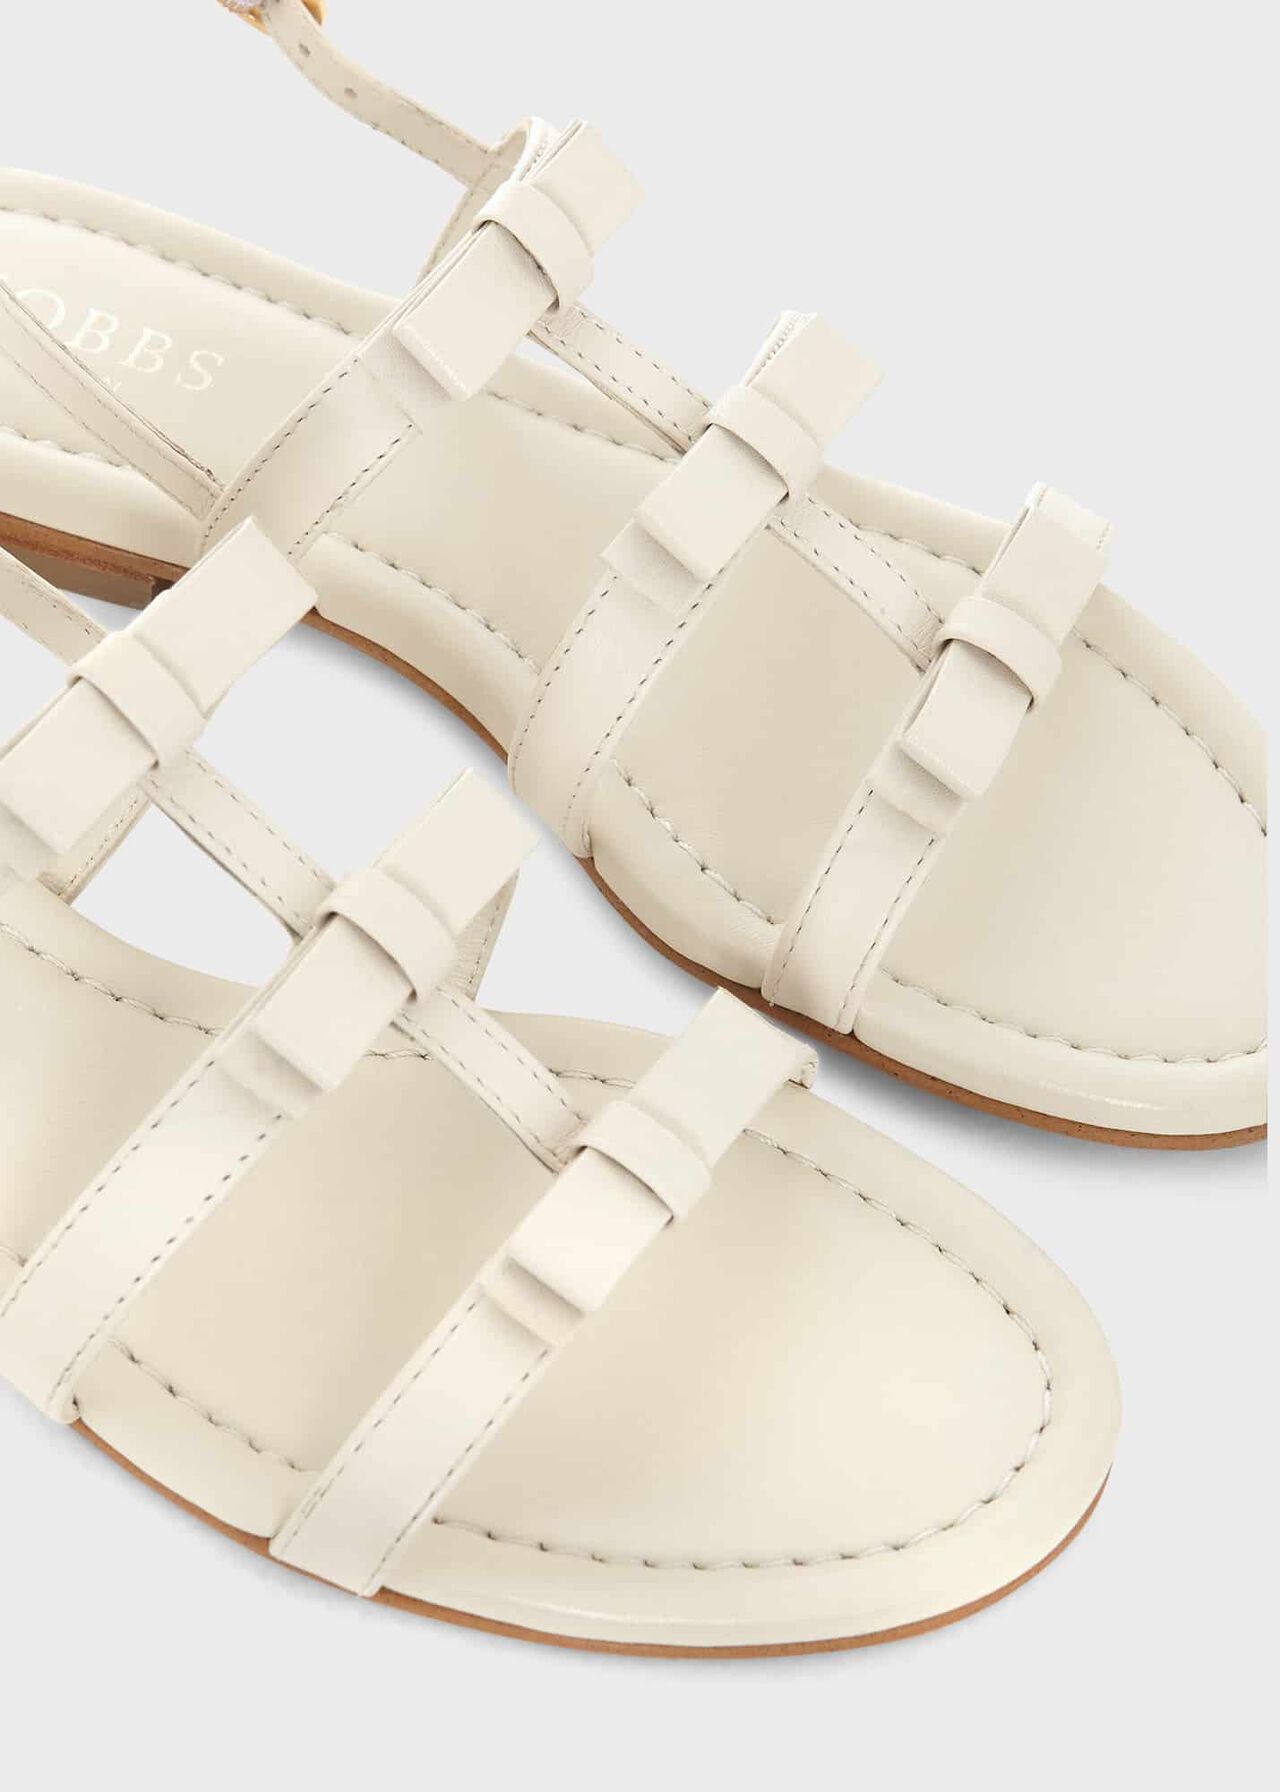 Holly Leather Bow Sandals, White, hi-res